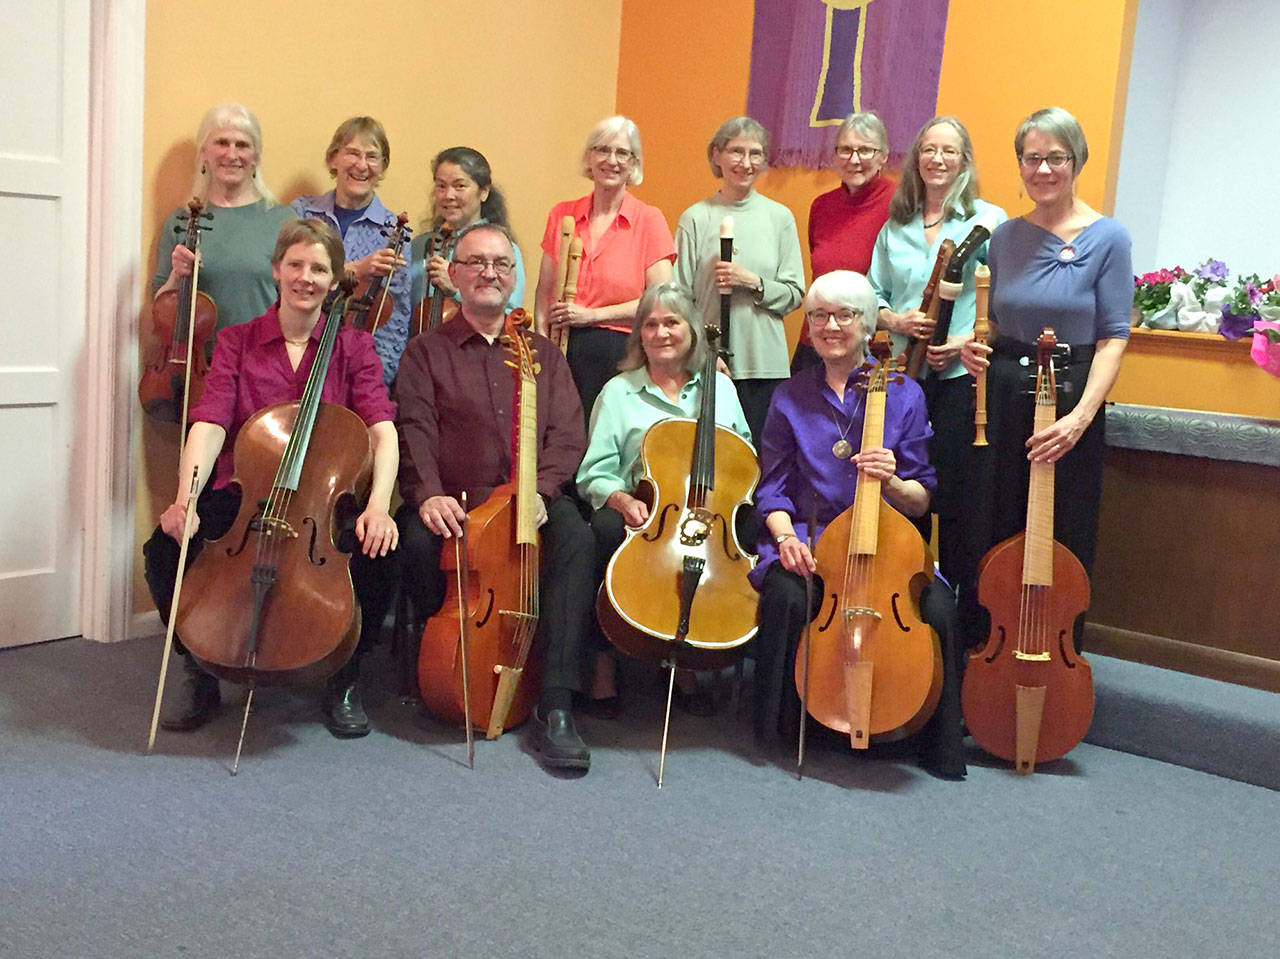 The Port Townsend Ladies Orchestra and Benevolent Society is tuning up for a concert Sunday. In the back row are Marcy Stewart, Kristin Smith, Jane Steussy, Louise Huntingford, Beatrix Dobyns, Pat Yearian, Barbara Tusting and Dahti Blanchard. In the front are Martha Breunig, Lee Inman, Gretchen Cooper and Diane Vaux.